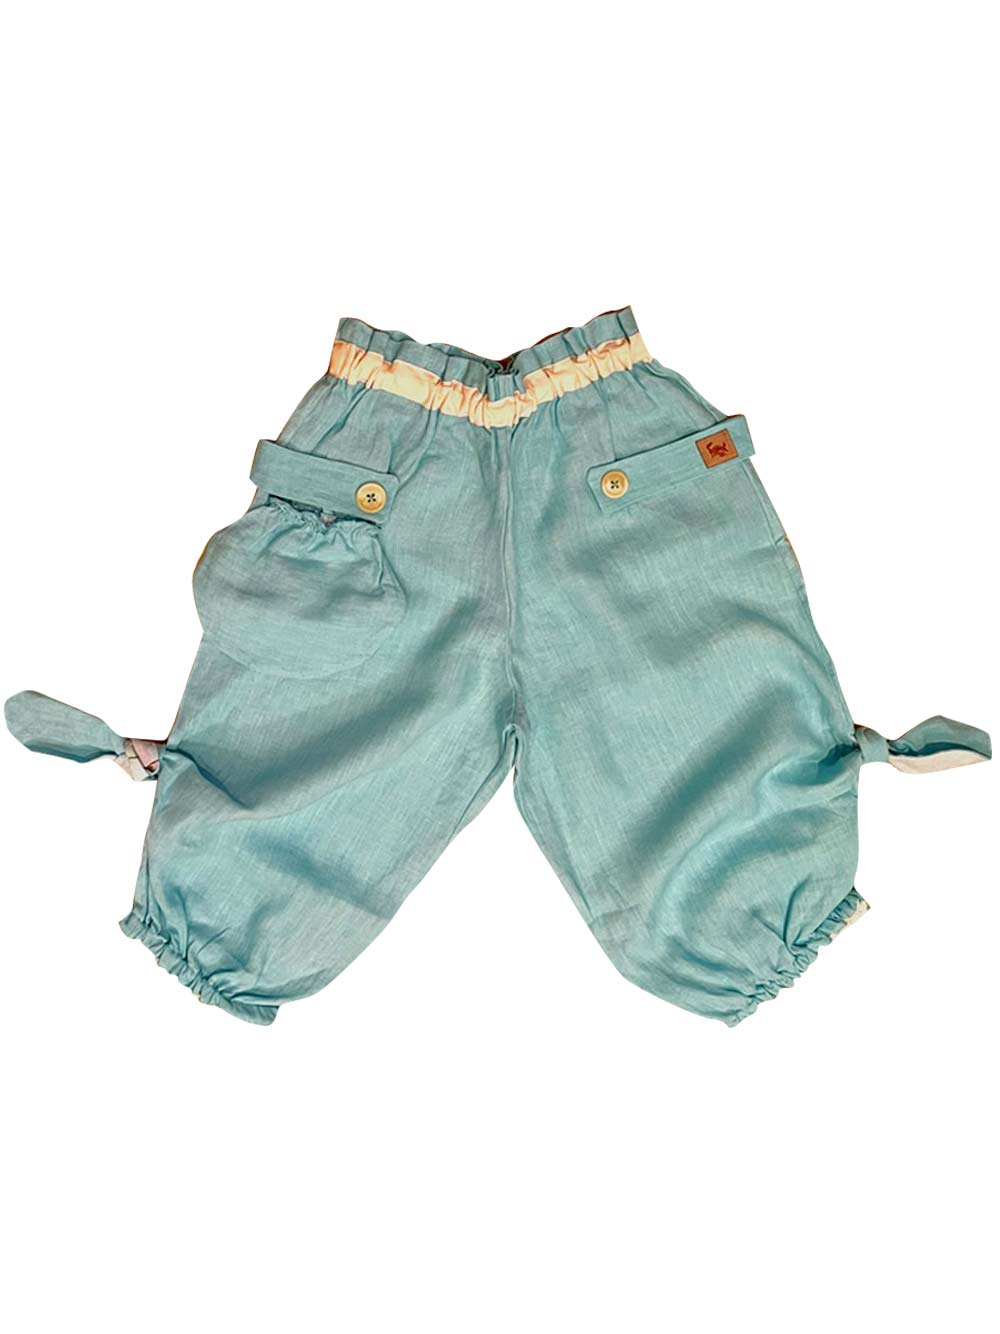 Turquoise River Croppred Pants